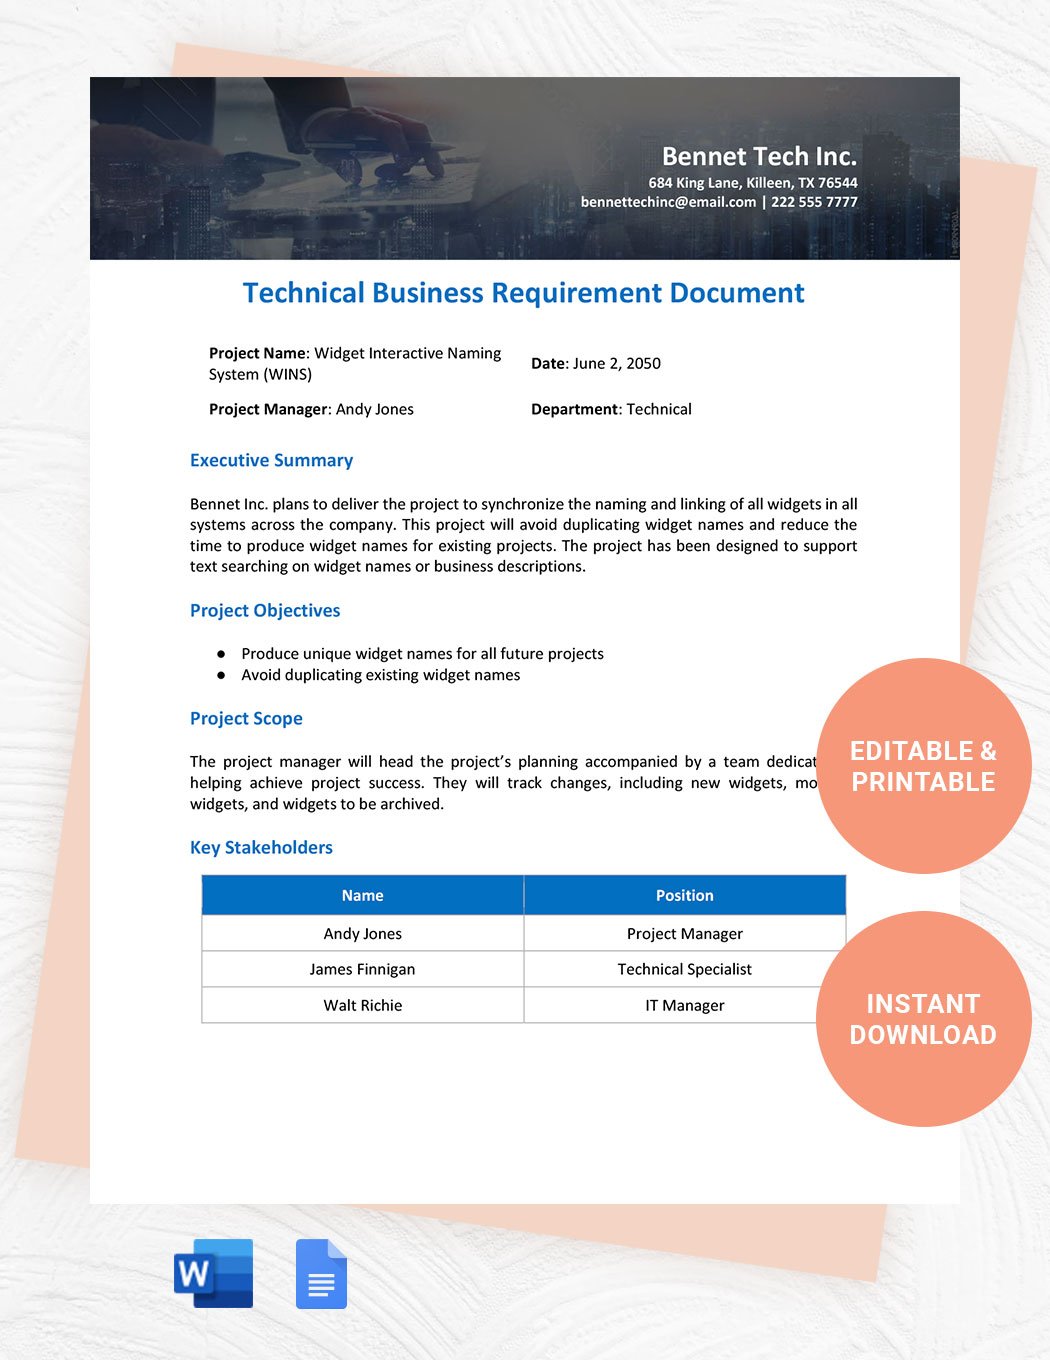 Technical Business Requirements Document Template in Word, Google Docs